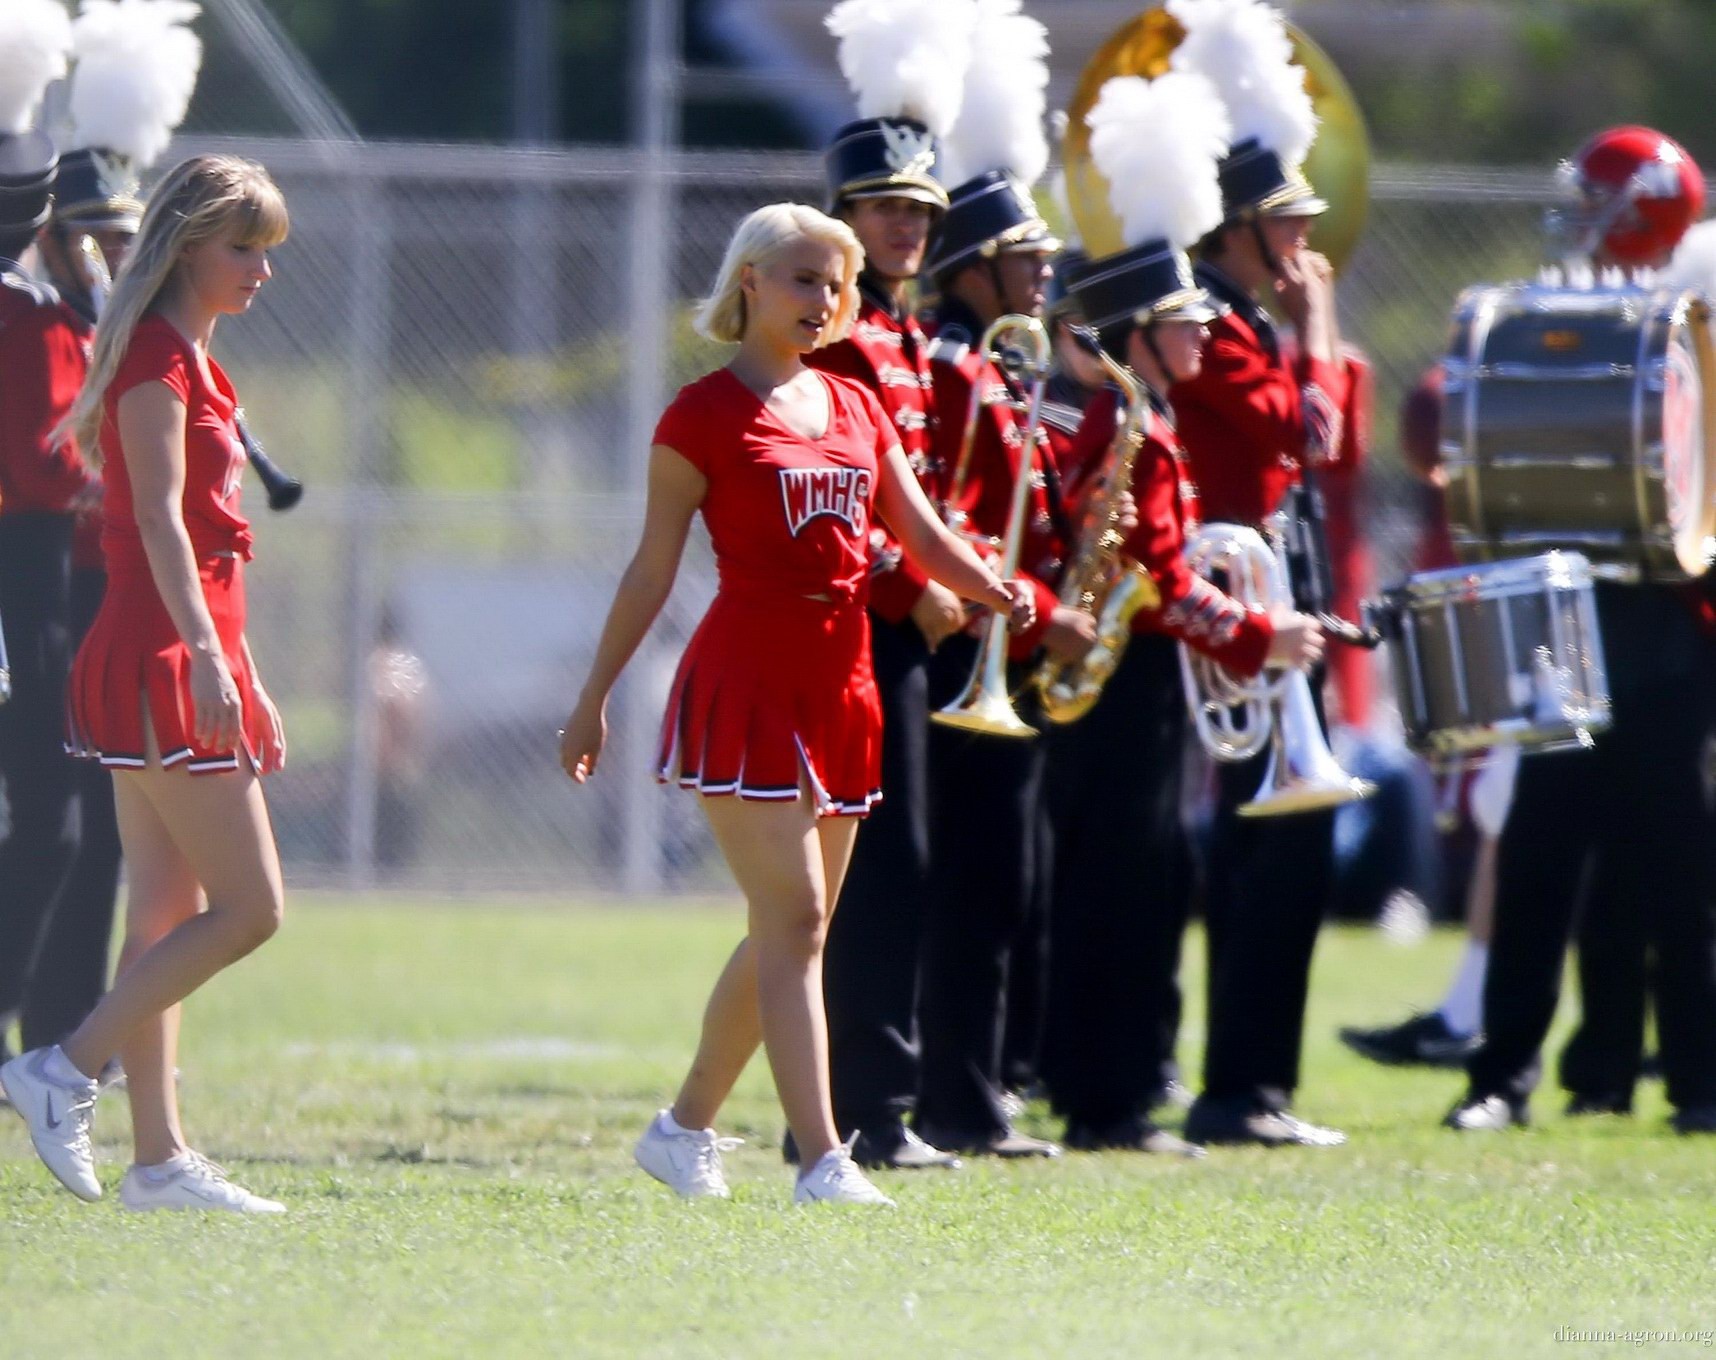 Dianna Agron in cheerleader outfit flashing her red panties on Glee season 6 set #75185113